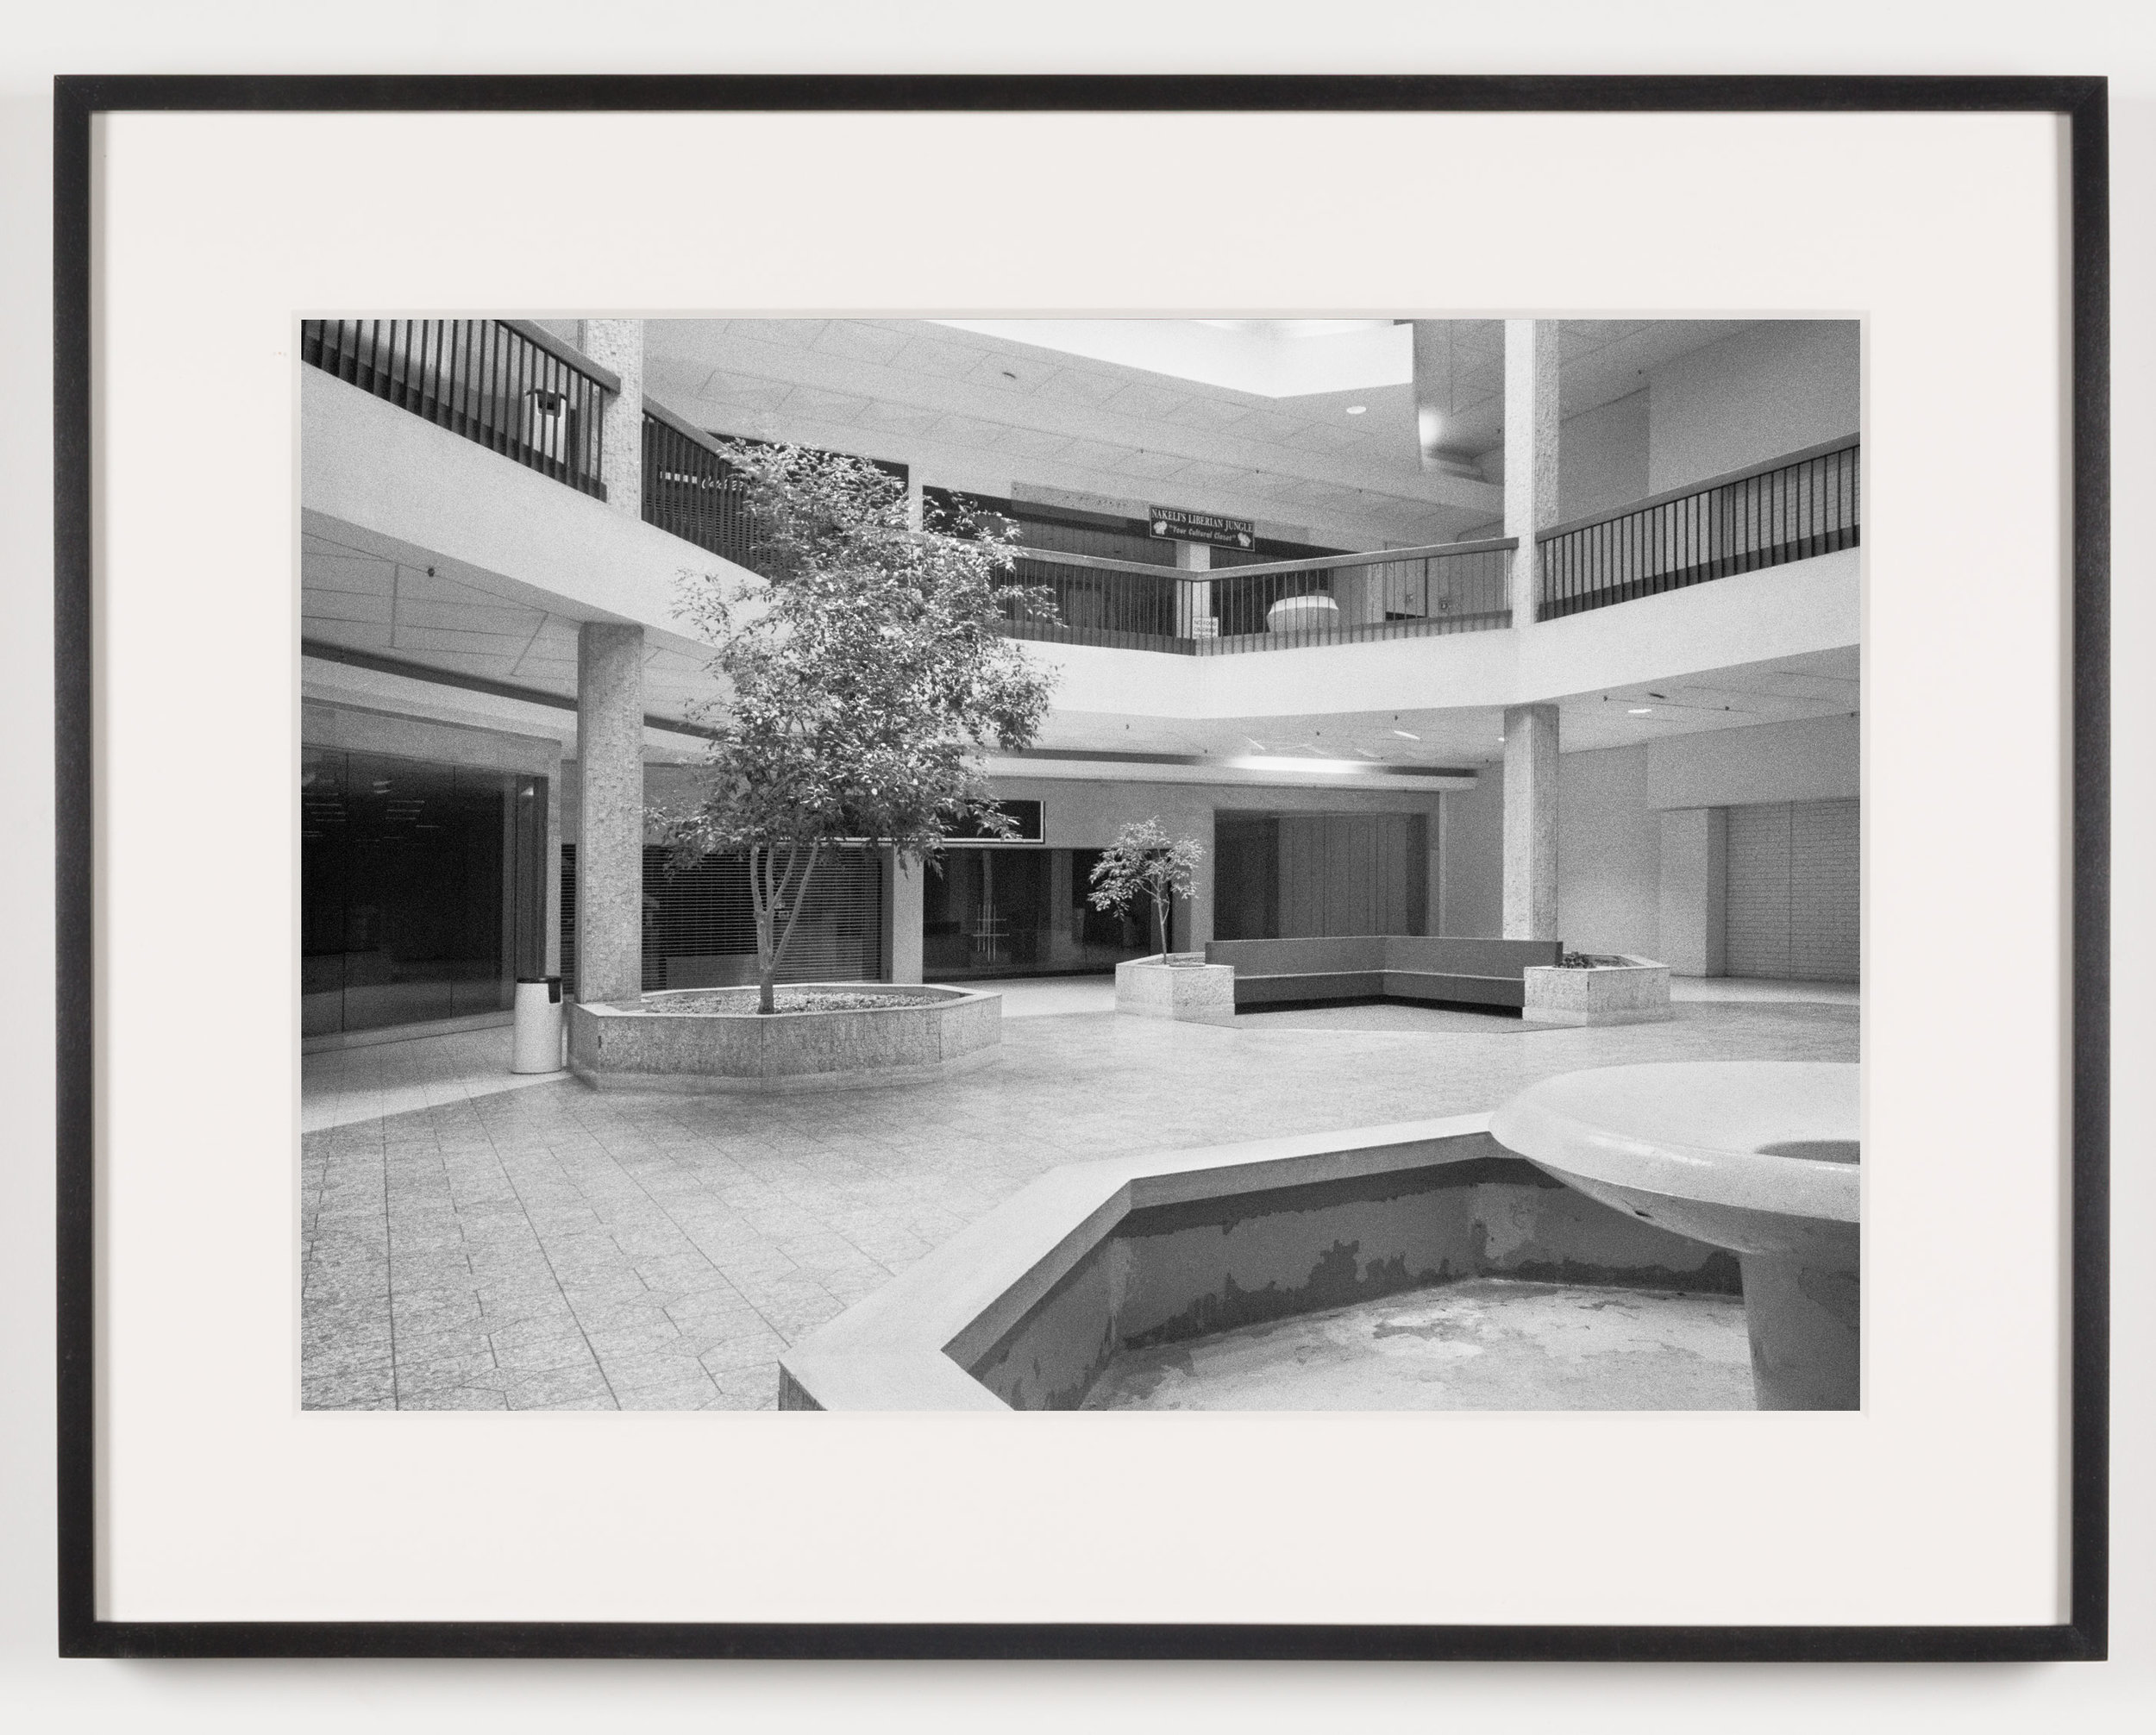   Randall Park Mall (View of Fountain, Seating Area), North Randall, OH, Est. 1976, Demo. 2014   2011  Epson Ultrachrome K3 archival ink jet print on Hahnemühle Photo Rag paper  21 5/8 x 28 1/8 inches   American Passages, 2001–2011    A Diagram of Fo